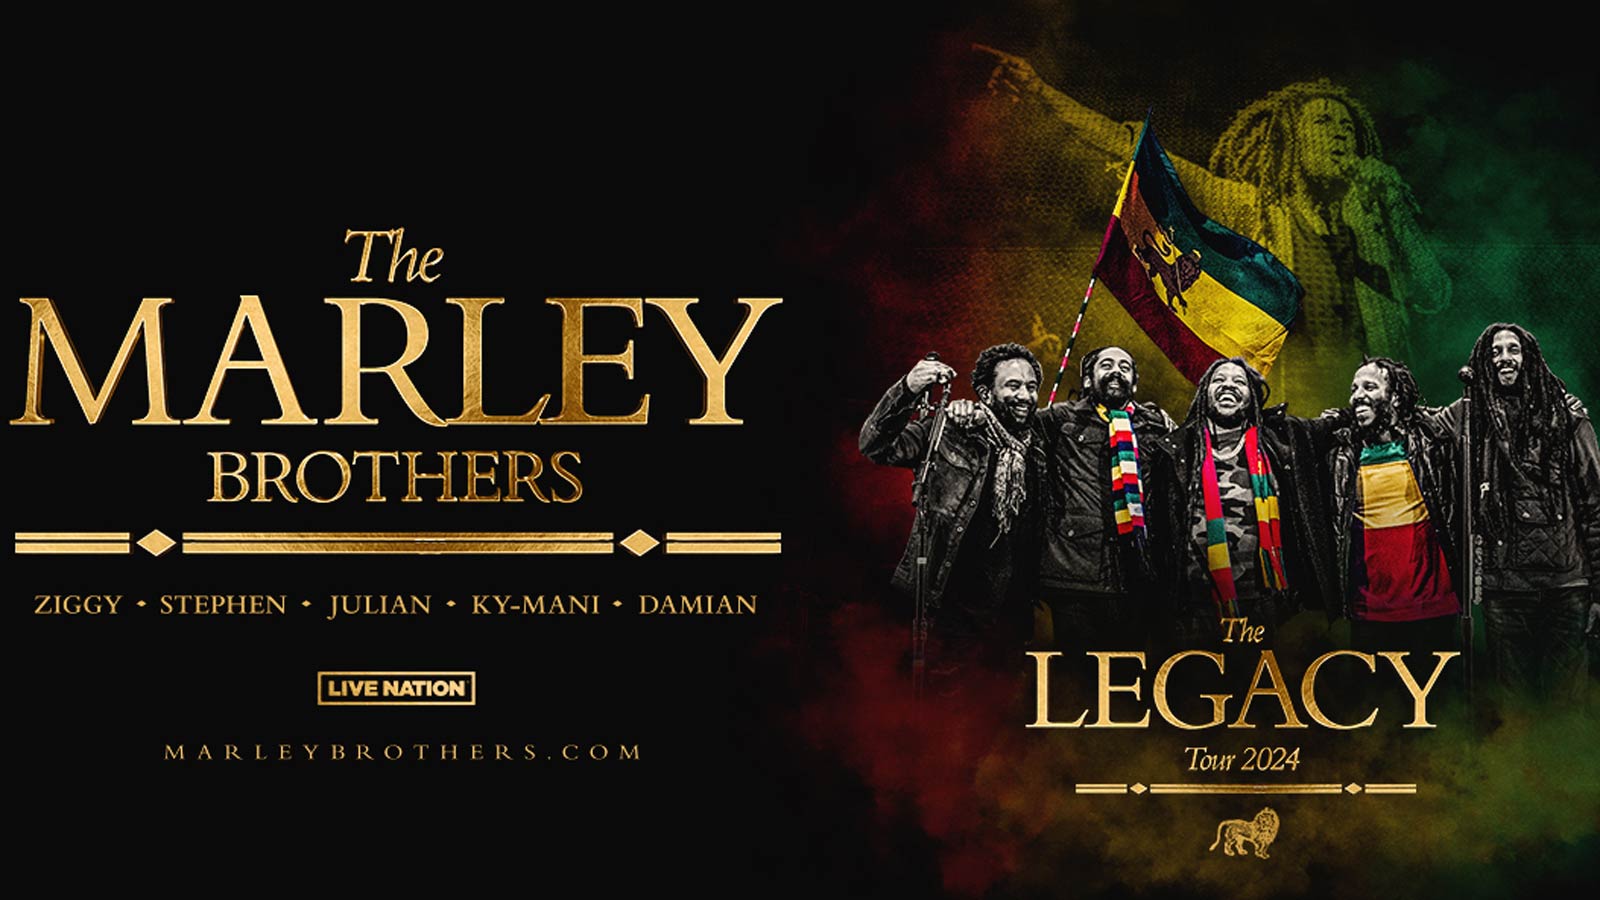 A promotional graphic for “The Marley Brothers: The Legacy Tour” shows Ziggy, Stephen, Julian, Ky-Mani and Damian Marley in the foreground and Bob Marley in the background.